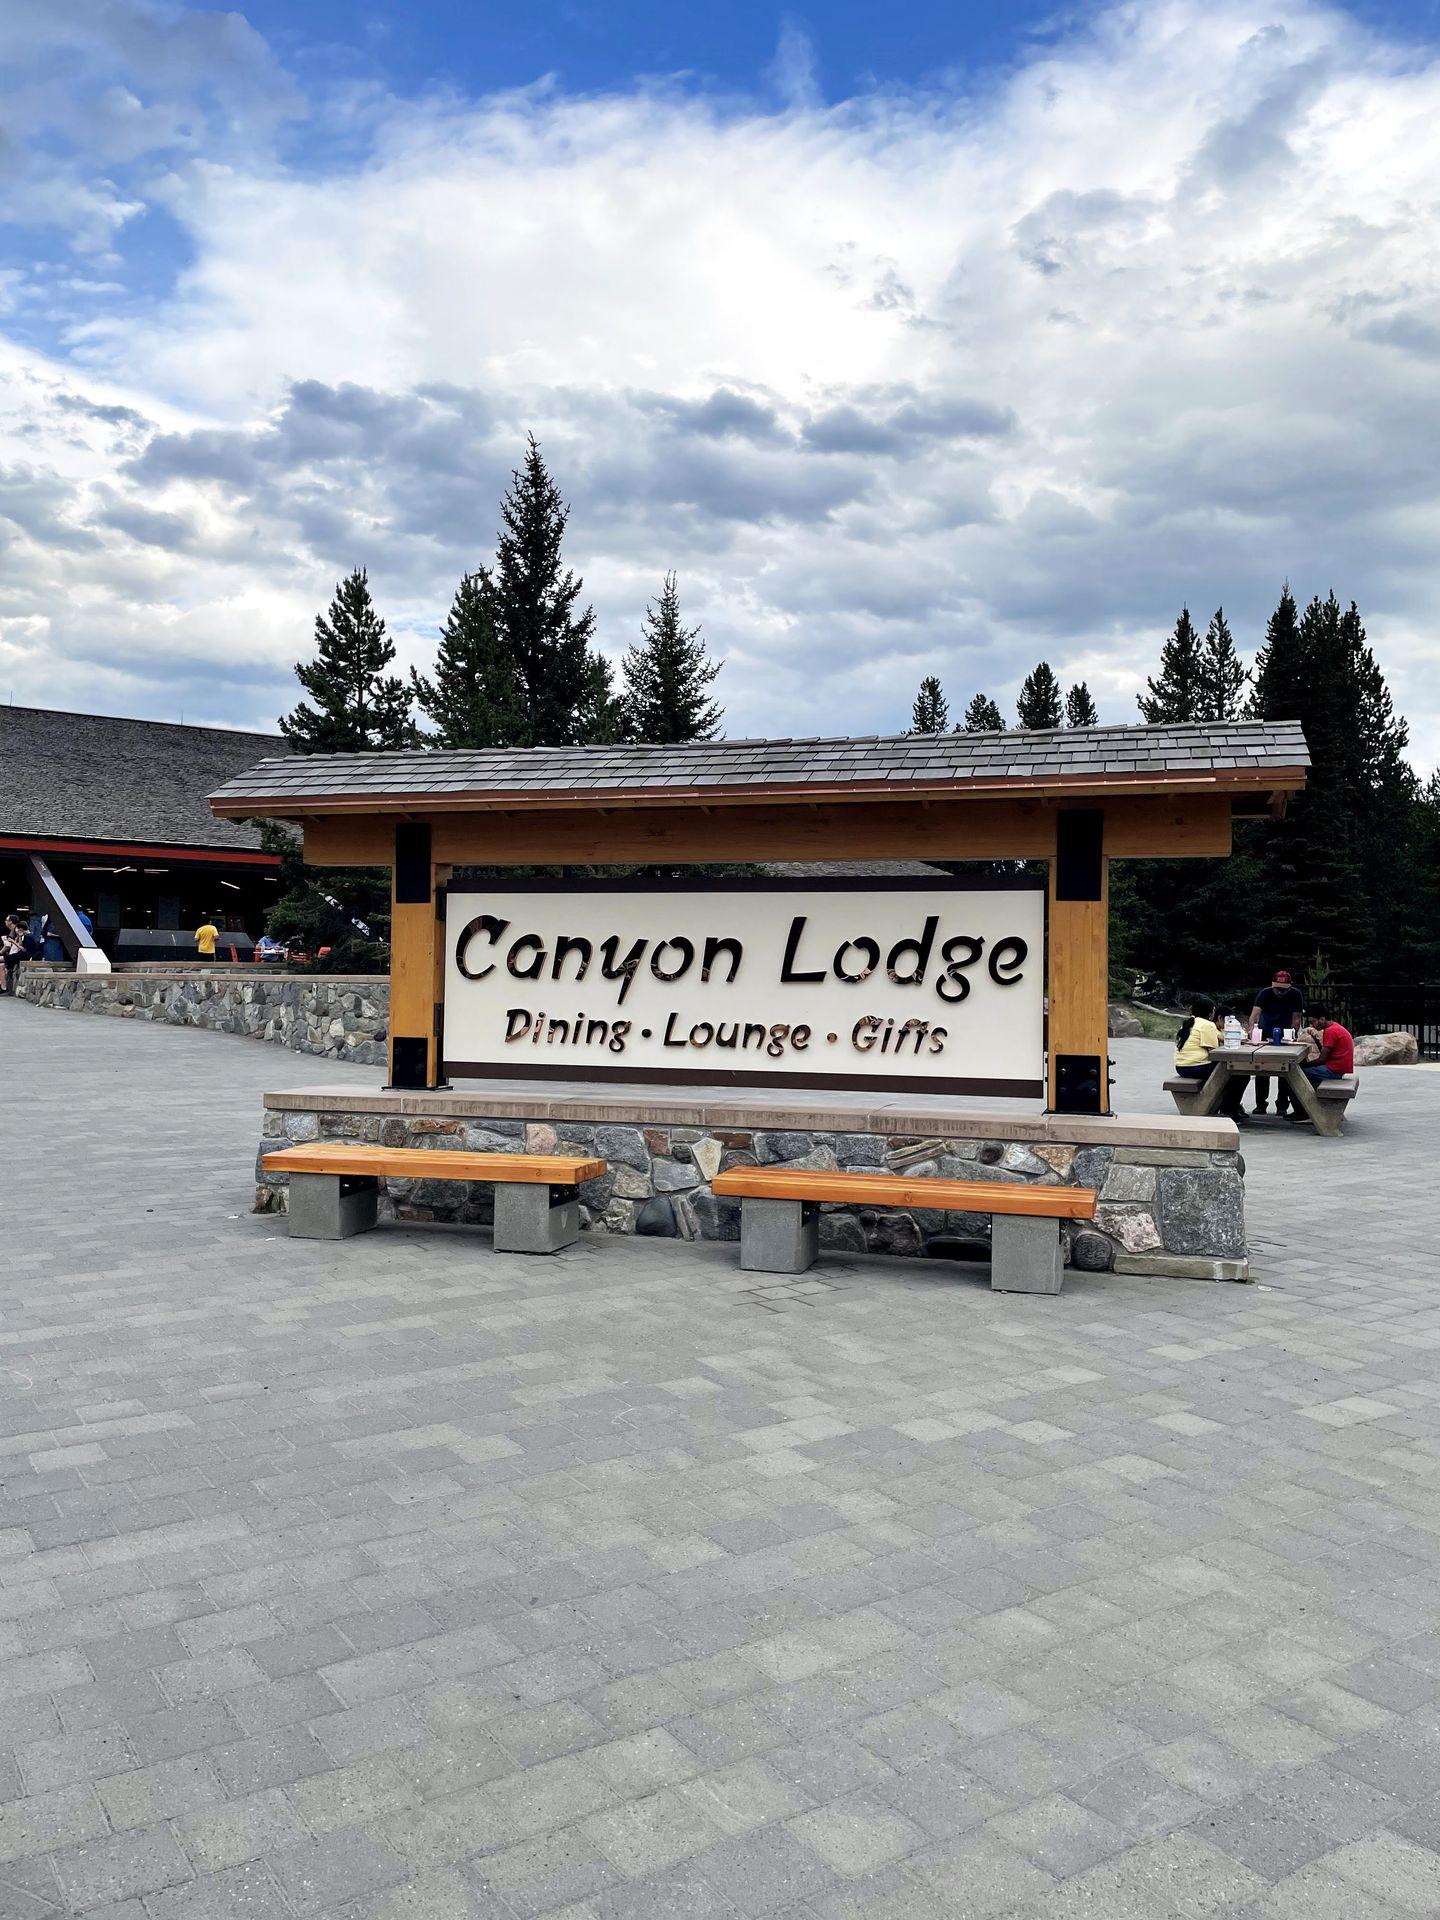 A sign for Canyon Lodge with the words "Dining-Lounge-Gifts"